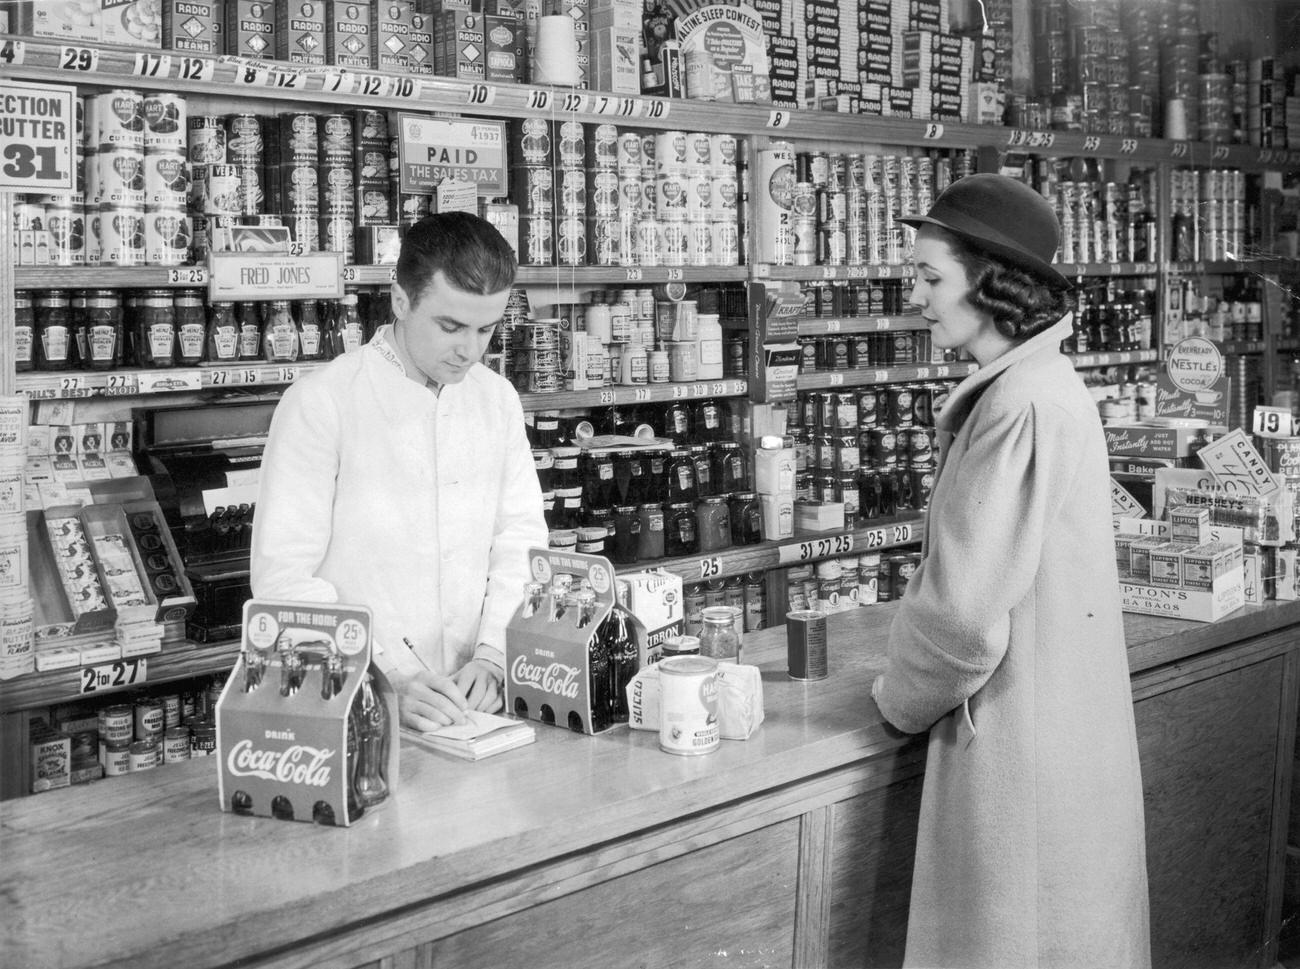 A housewife at a grocery counter with two six-packs of Coca-Cola, bread, and canned goods, circa 1935.